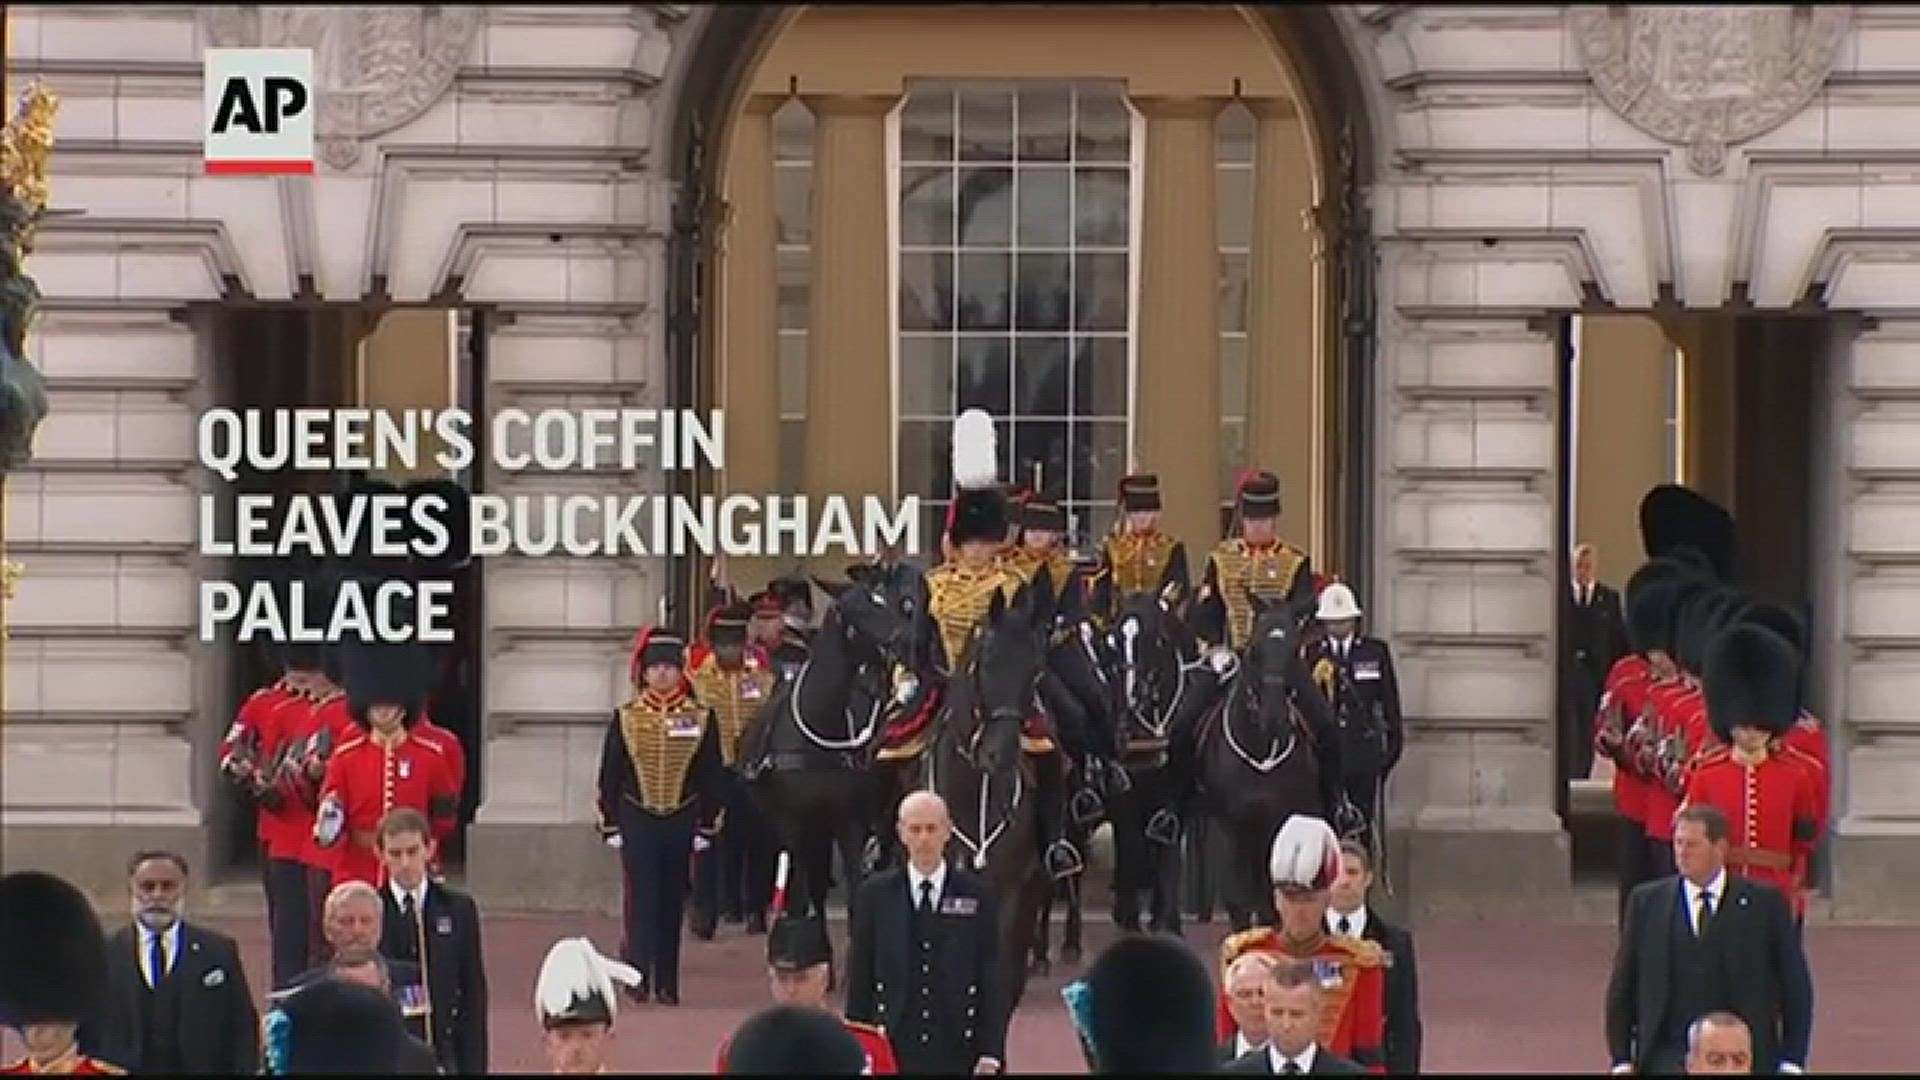 Queen Elizabeth II's coffin left Buckingham Palace for the last time Wednesday and was being taken amid somber pageantry on a horse-drawn gun carriage past crowds.